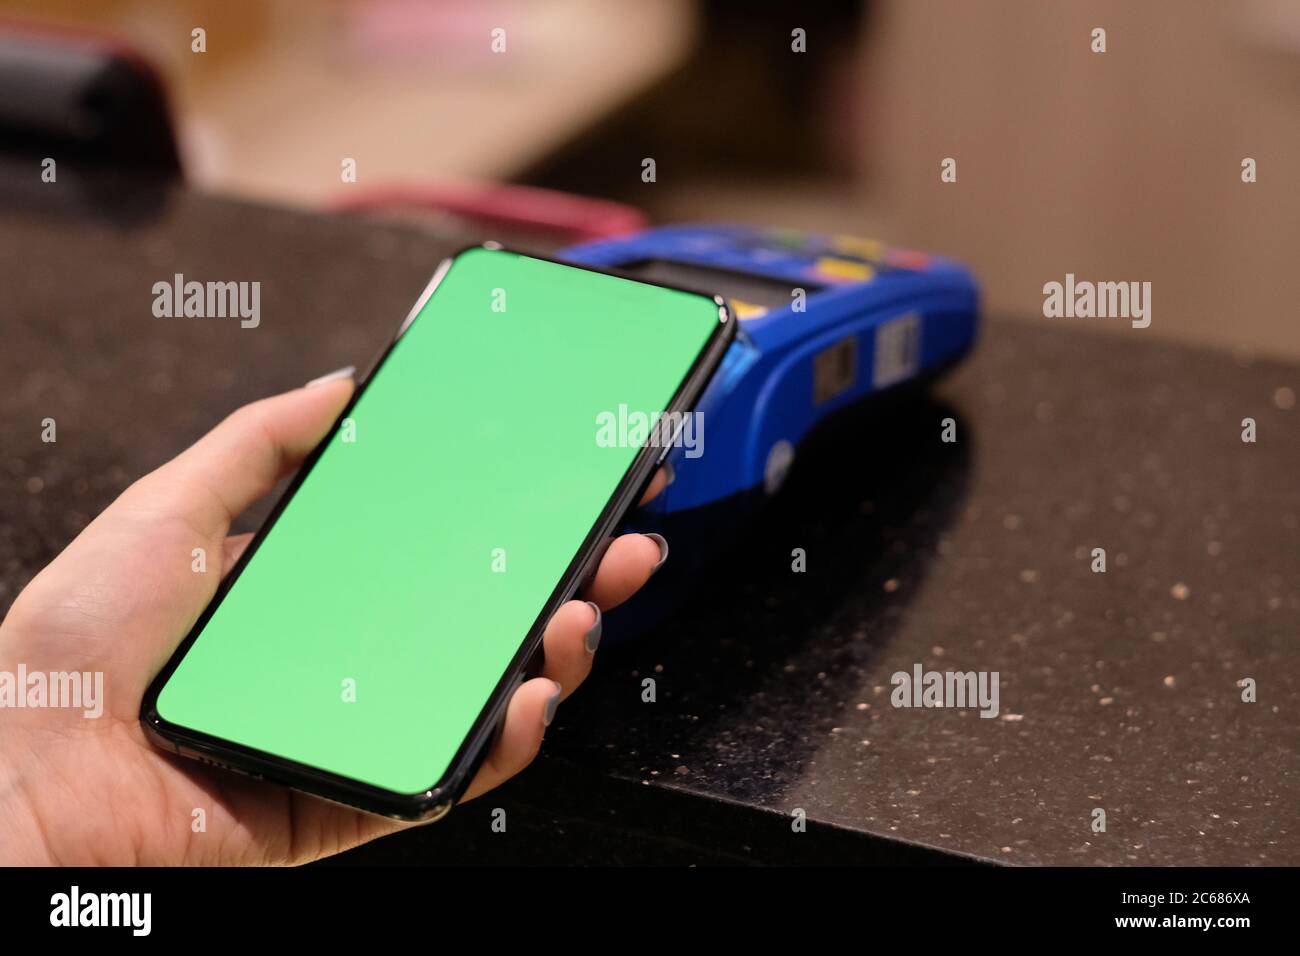 one hand holding green screen phone close to POS terminal on counter. Blur background. Contactless payment Stock Photo